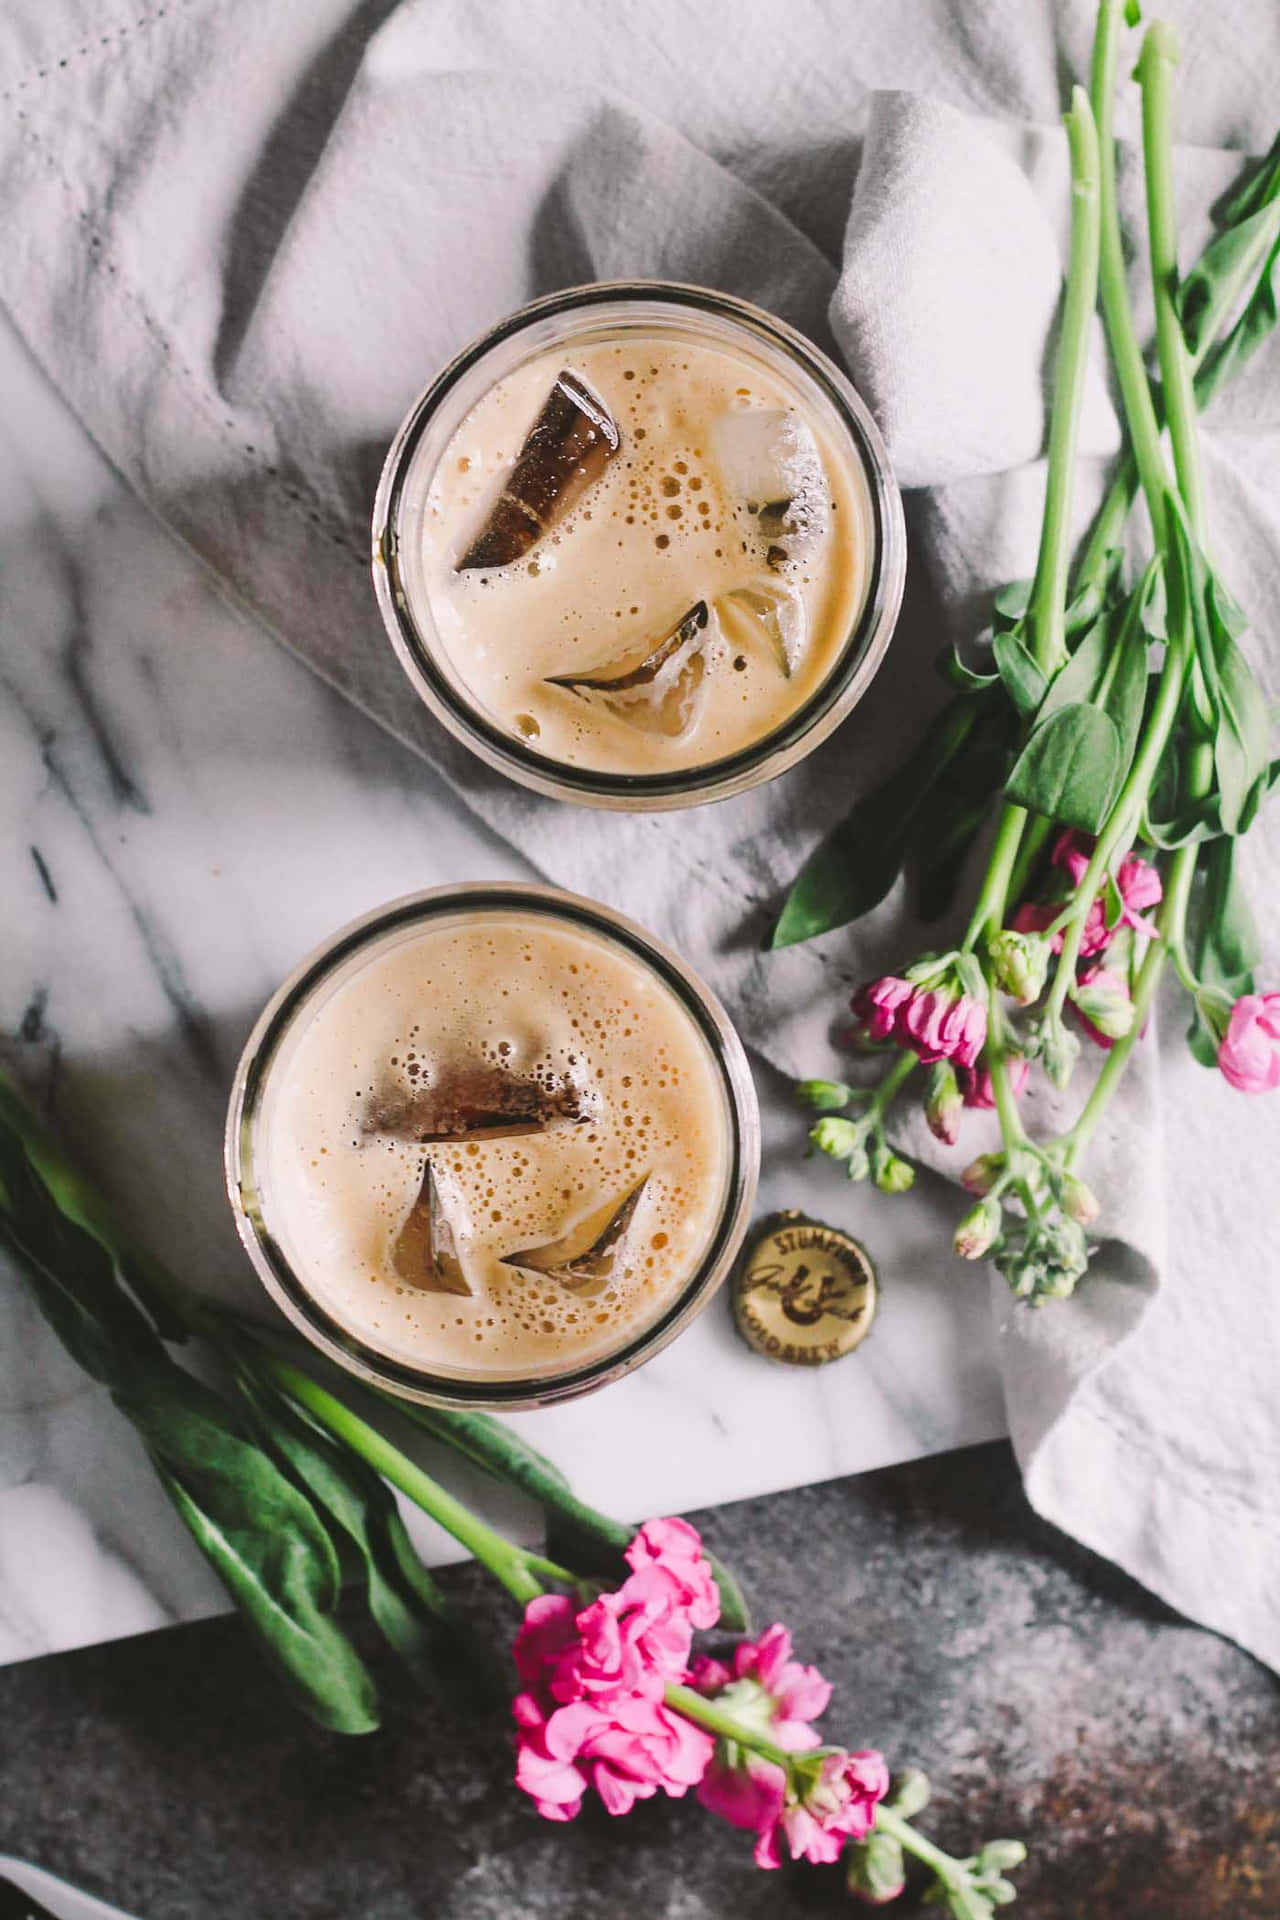 Refresh your summer with a cool iced coffee.